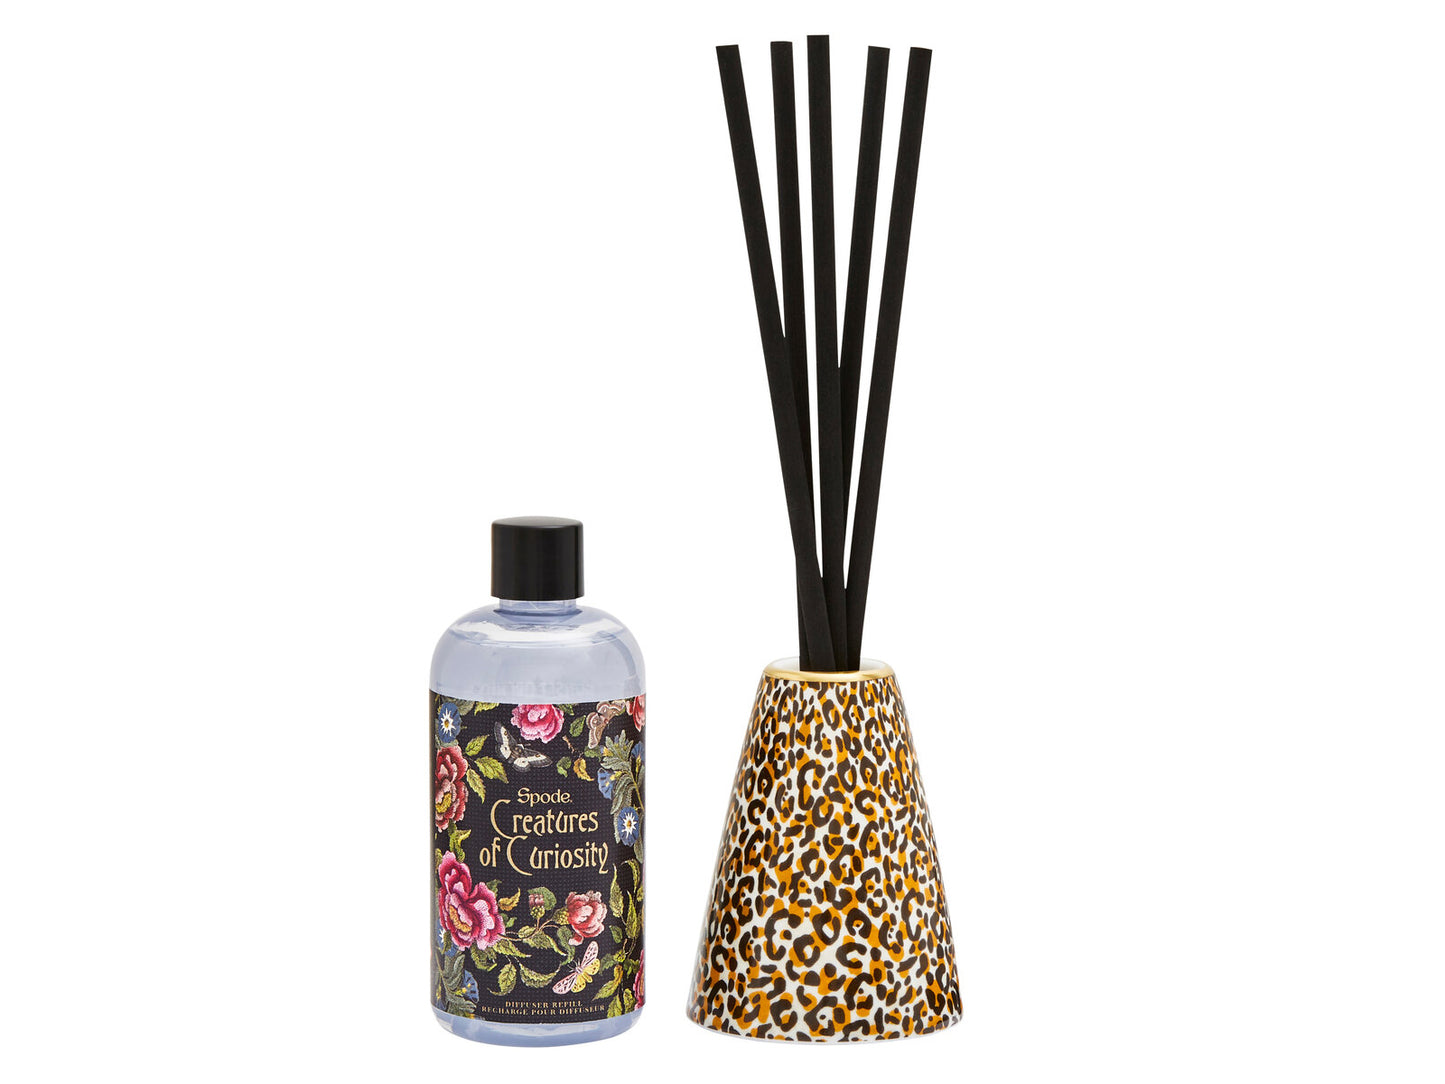 Spode Creatures Of Curiosity Reed Diffuser Leopard Set - Sunset Orchid & Patchouli